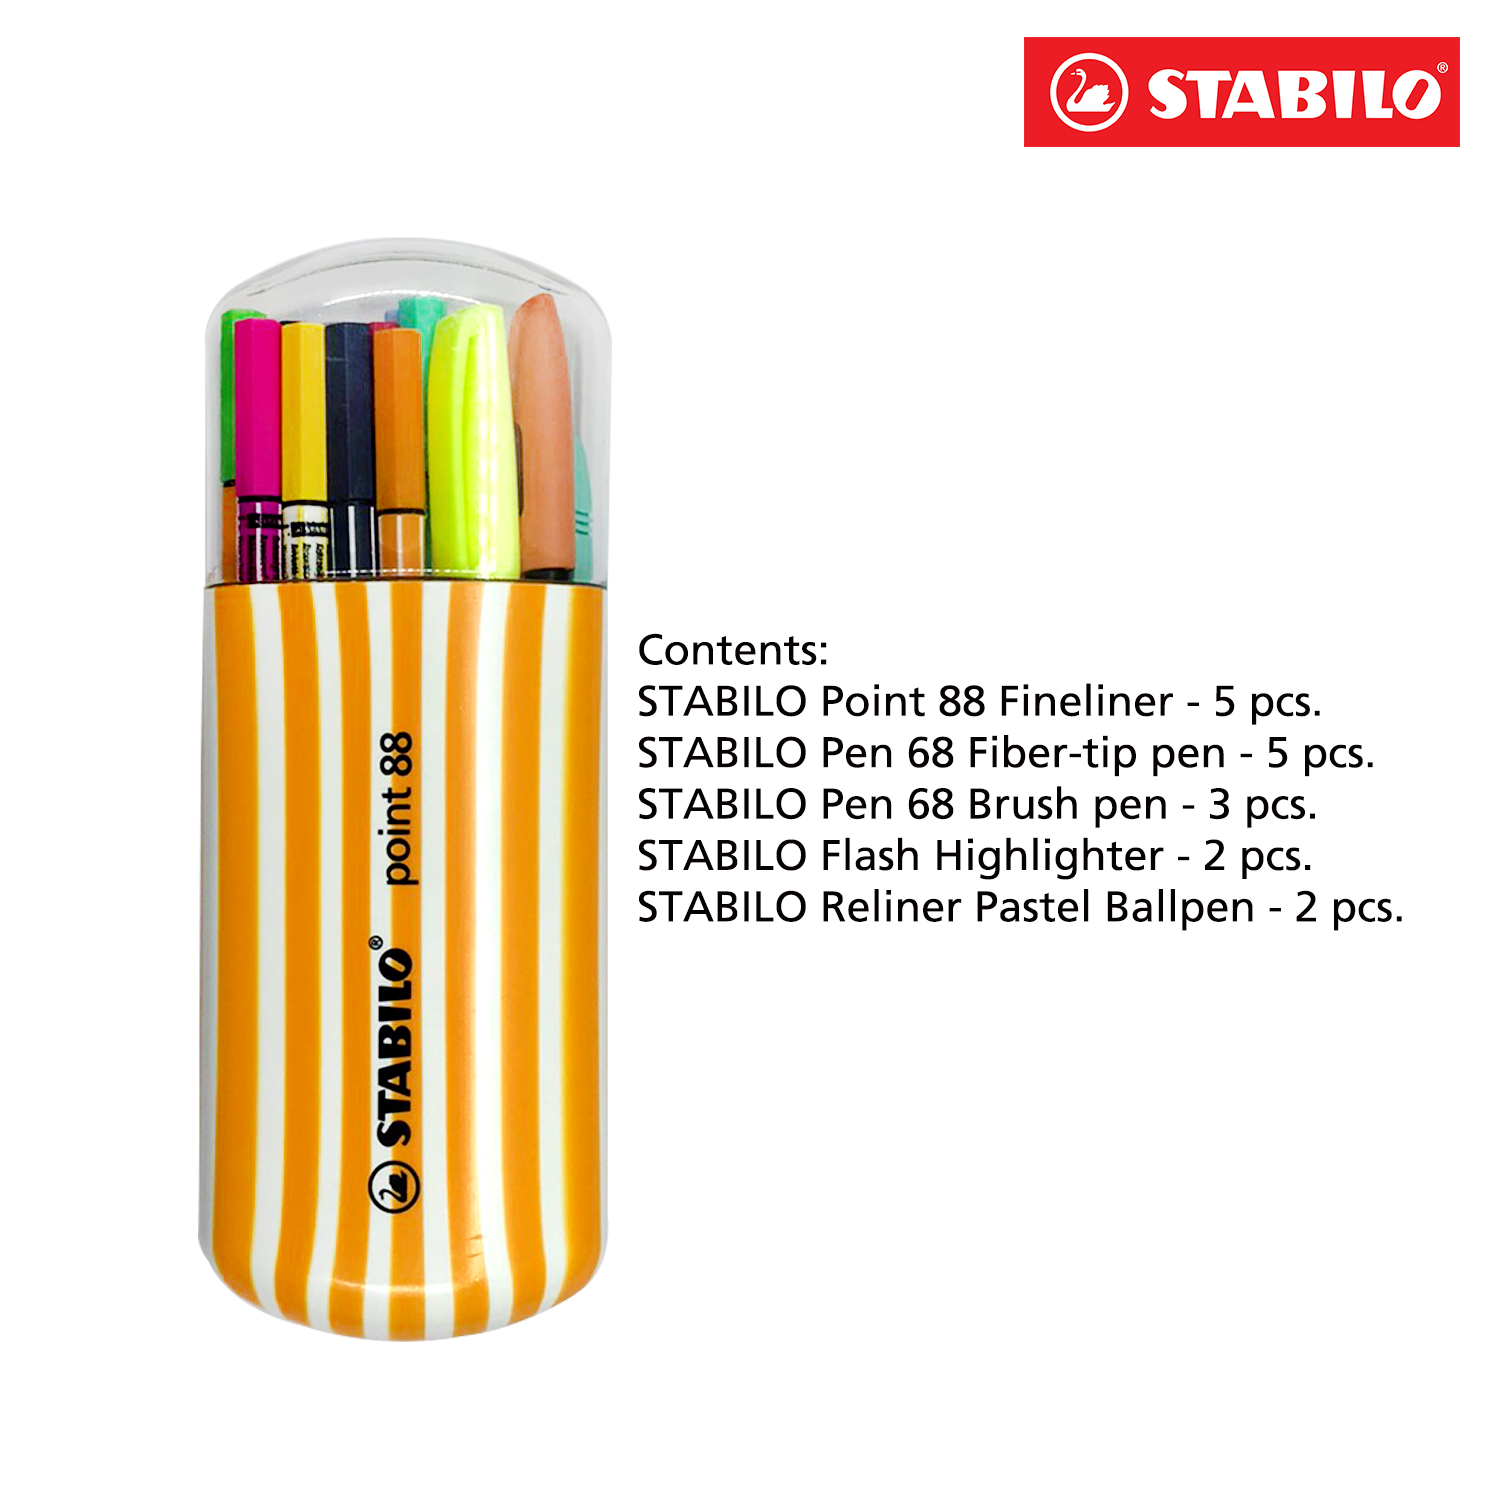 STABILO POINT 88 Zebrui Pack of 20 Colors